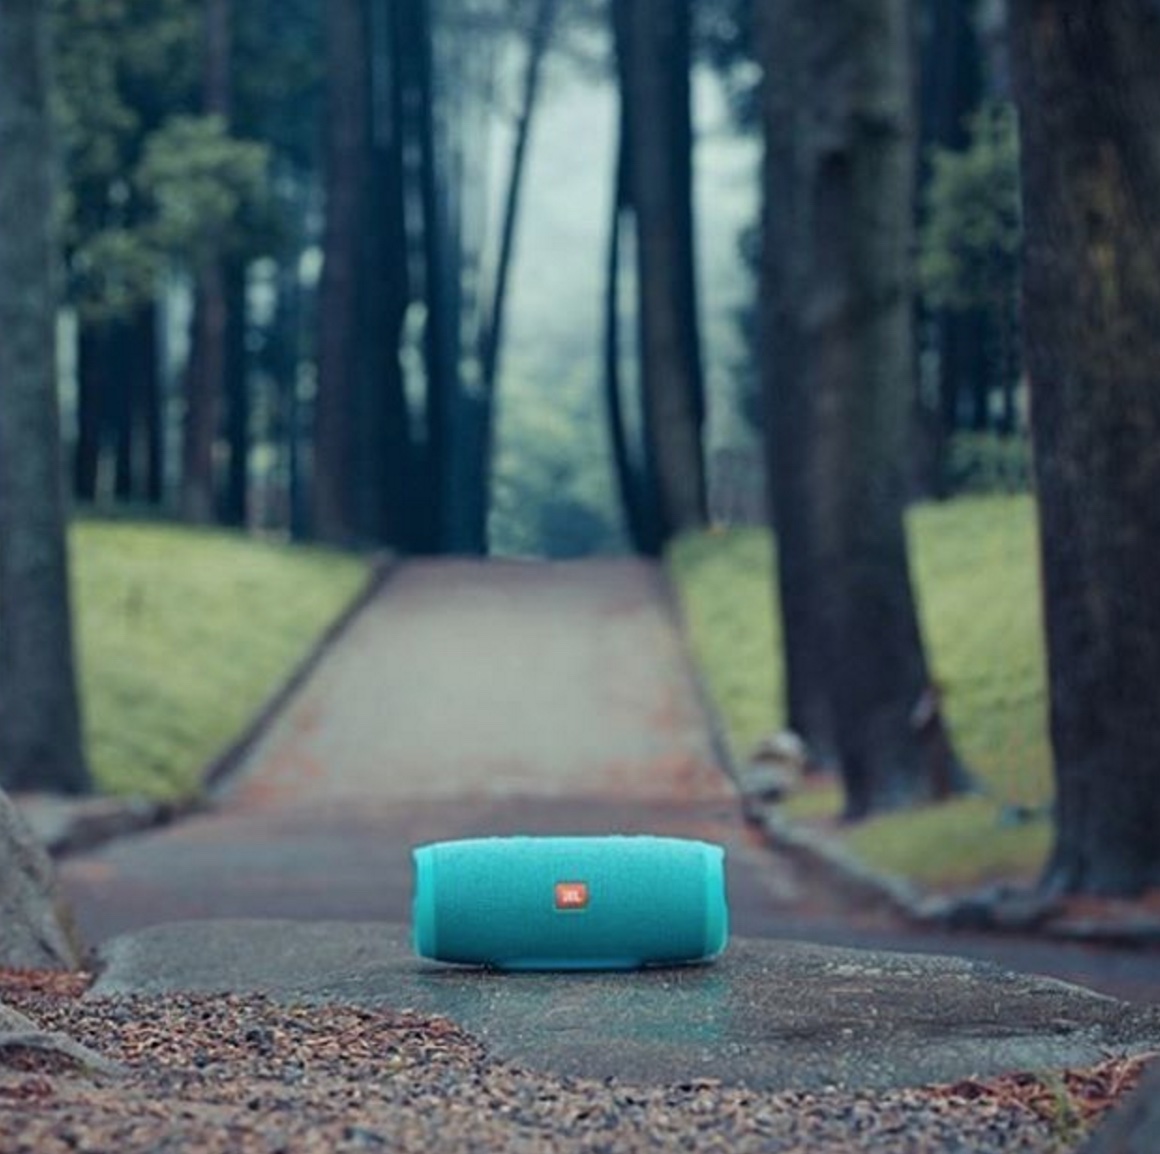 Google Now and Siri Now Available on JBL Portable Speakers!